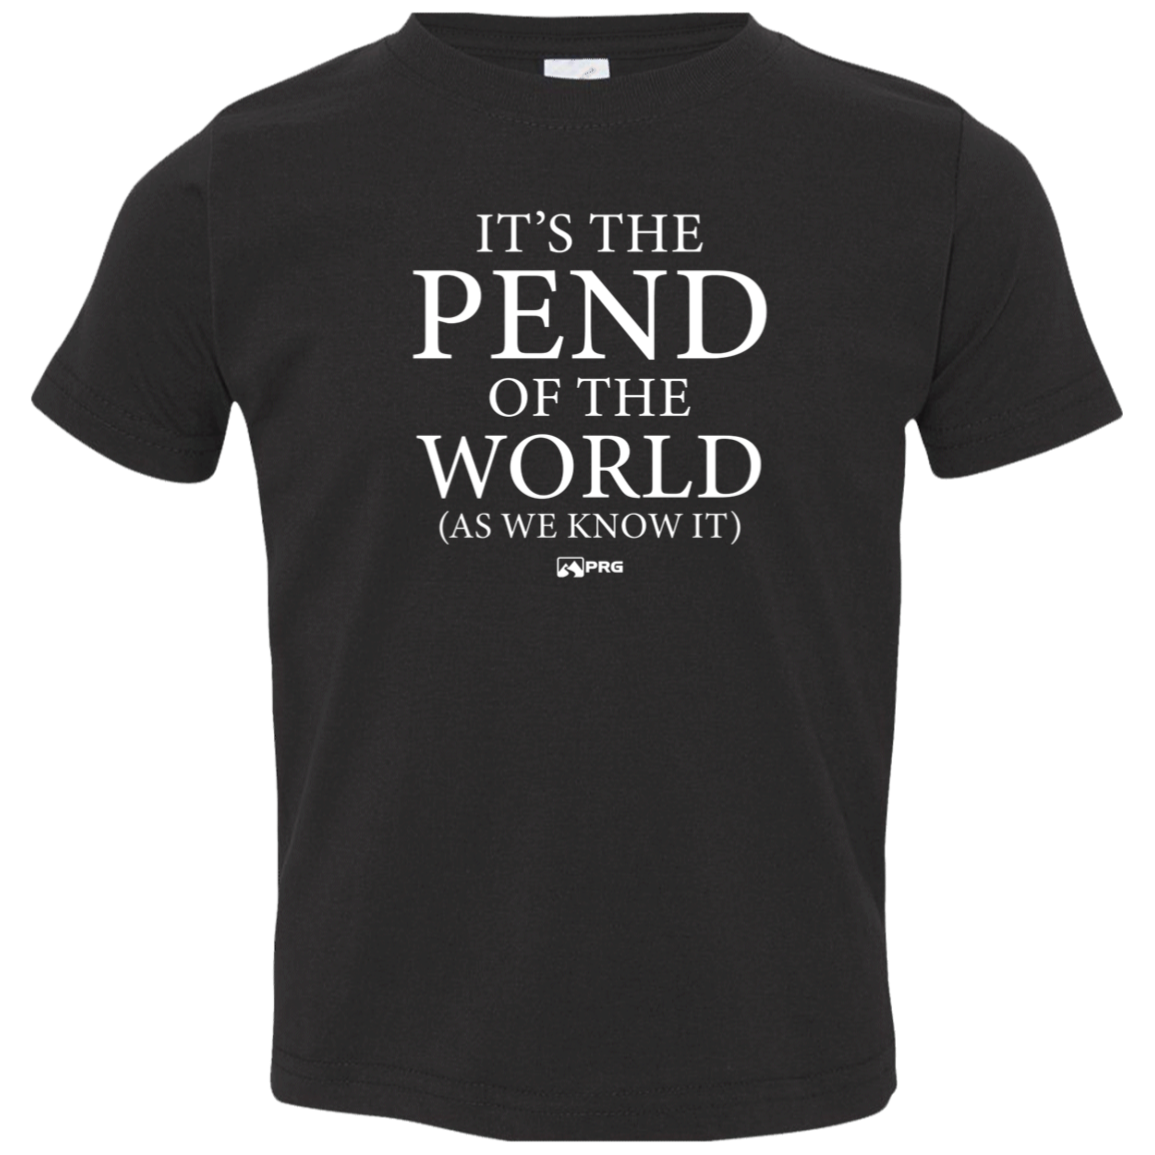 Pend of the World - Toddler Shirt